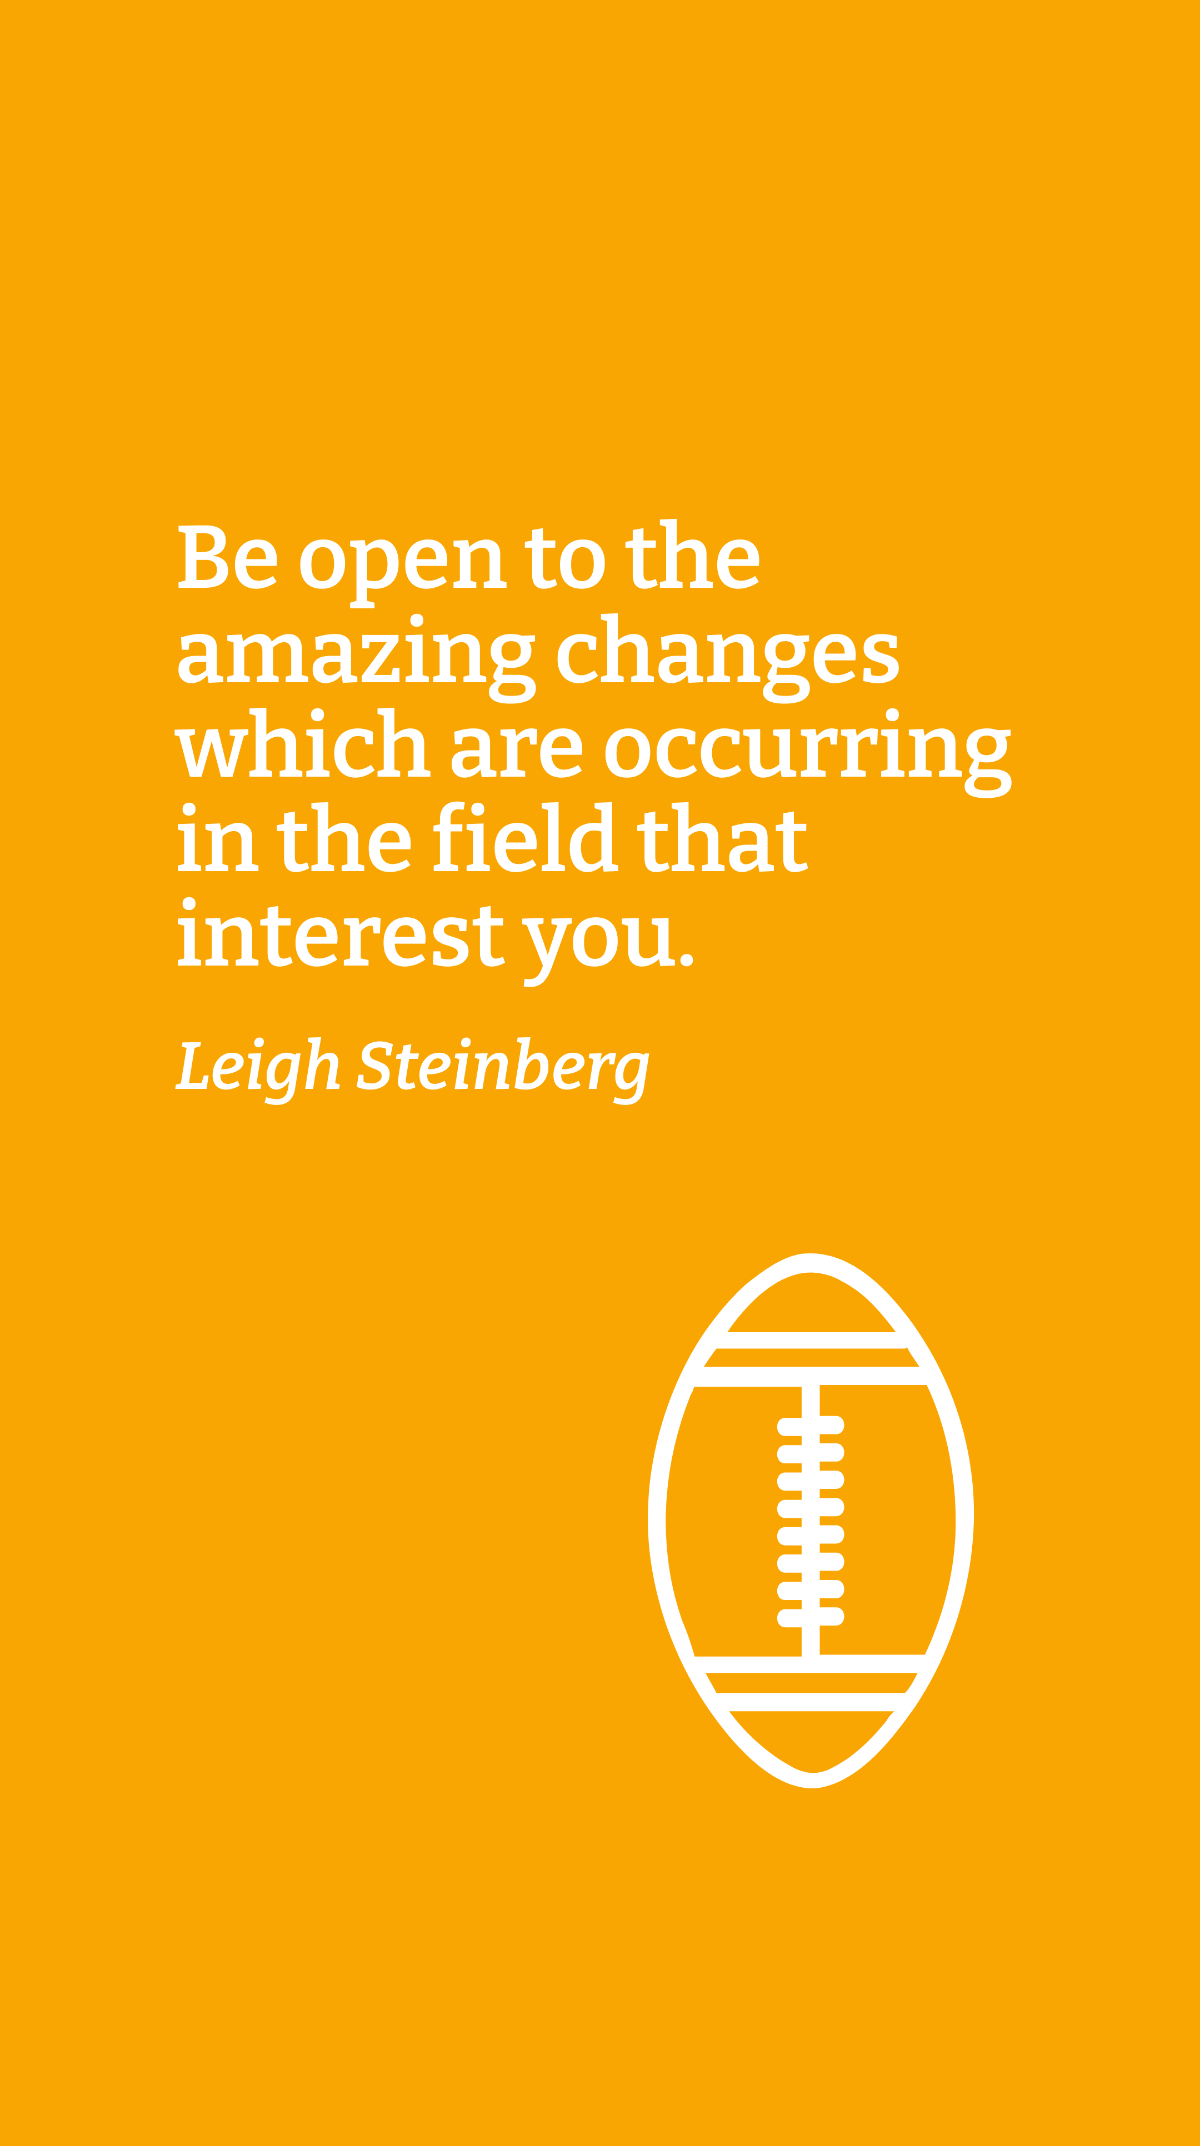 Leigh Steinberg - Be open to the amazing changes which are occurring in the field that interest you.